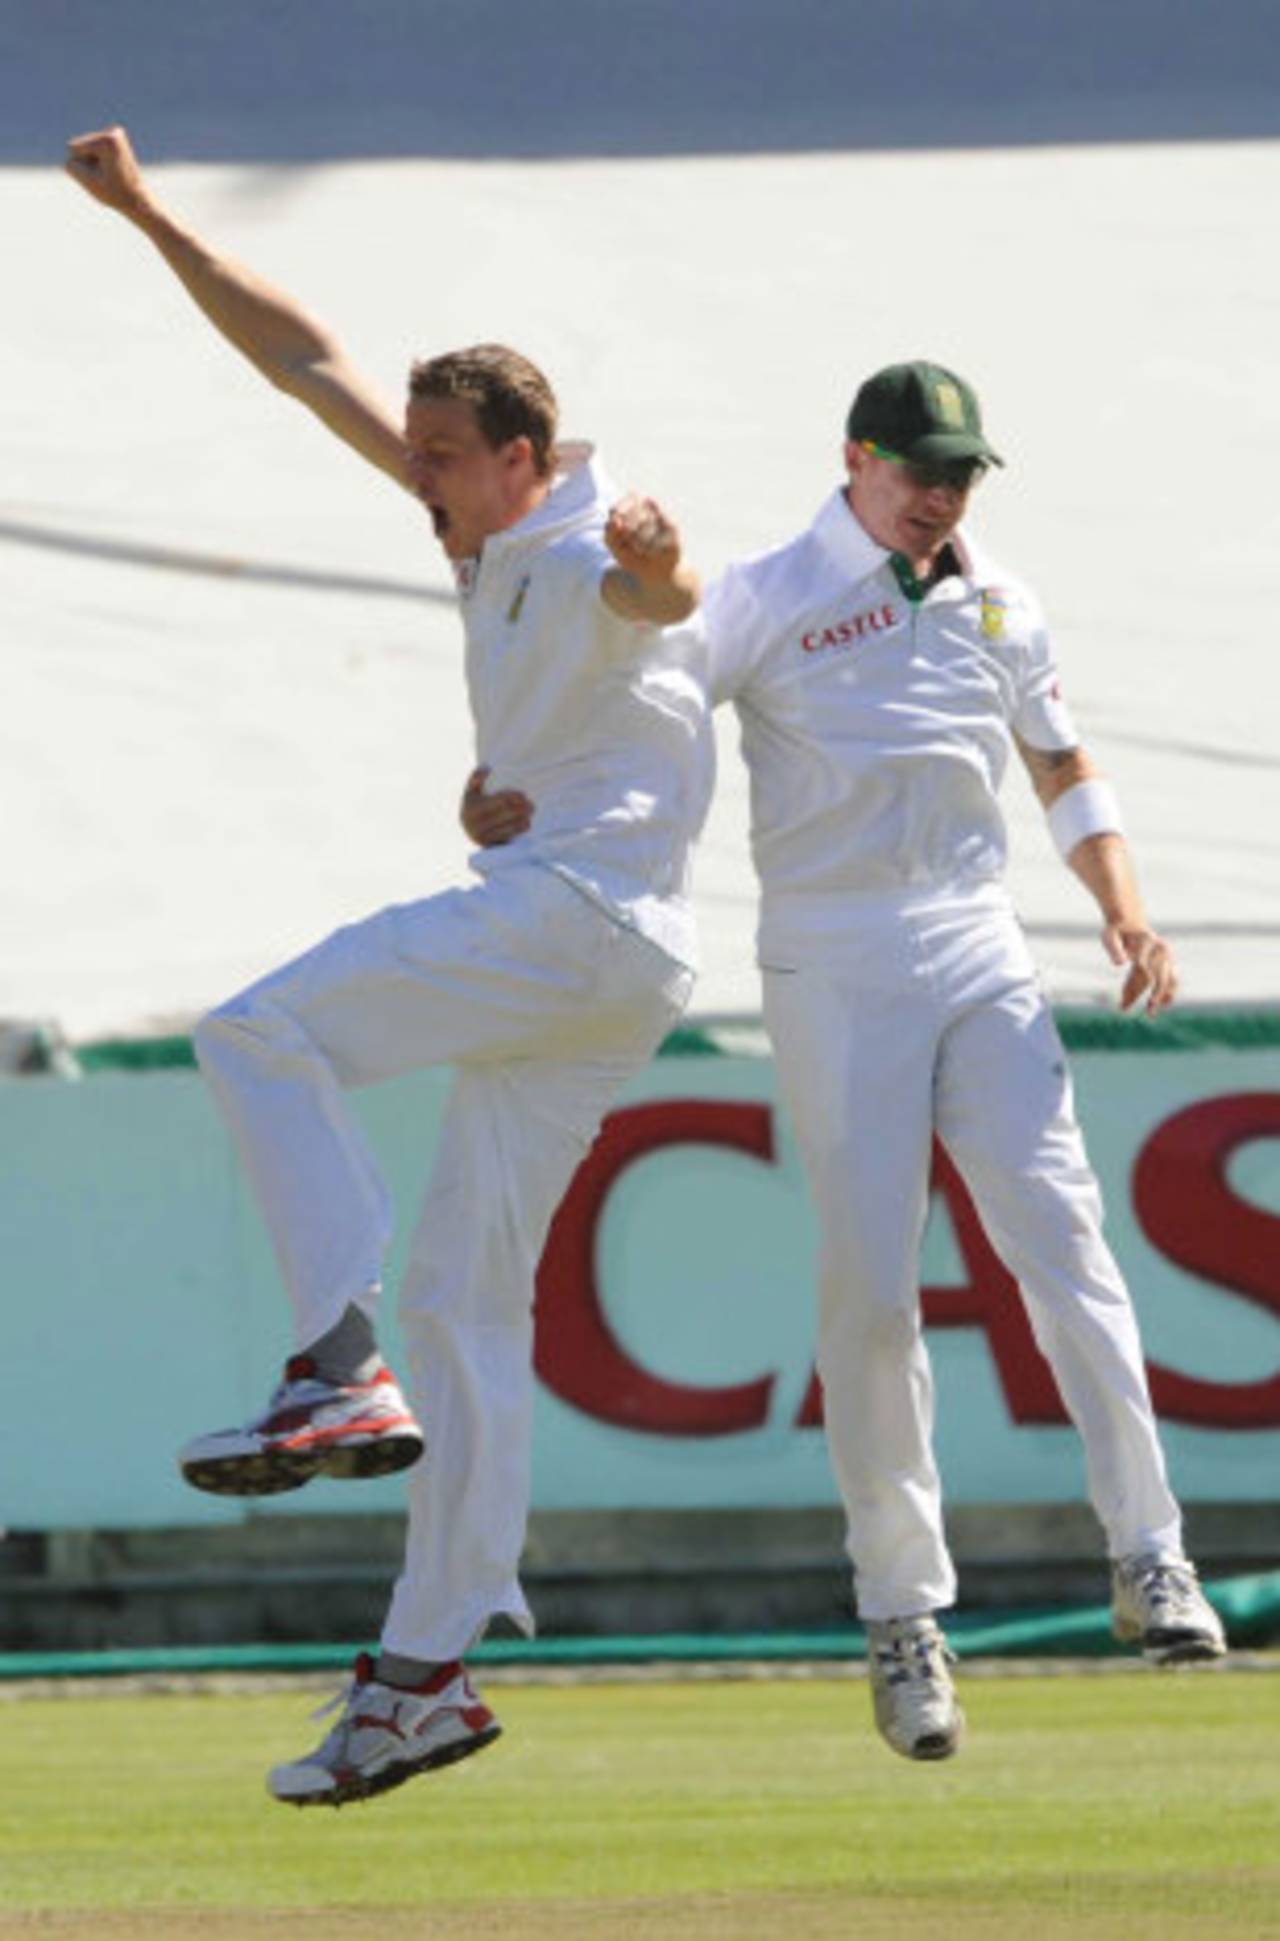 Morne Morkel: "My partnership with Dale is long gone. Vernon and Dale are the new guys and I've made peace with that"&nbsp;&nbsp;&bull;&nbsp;&nbsp;Getty Images